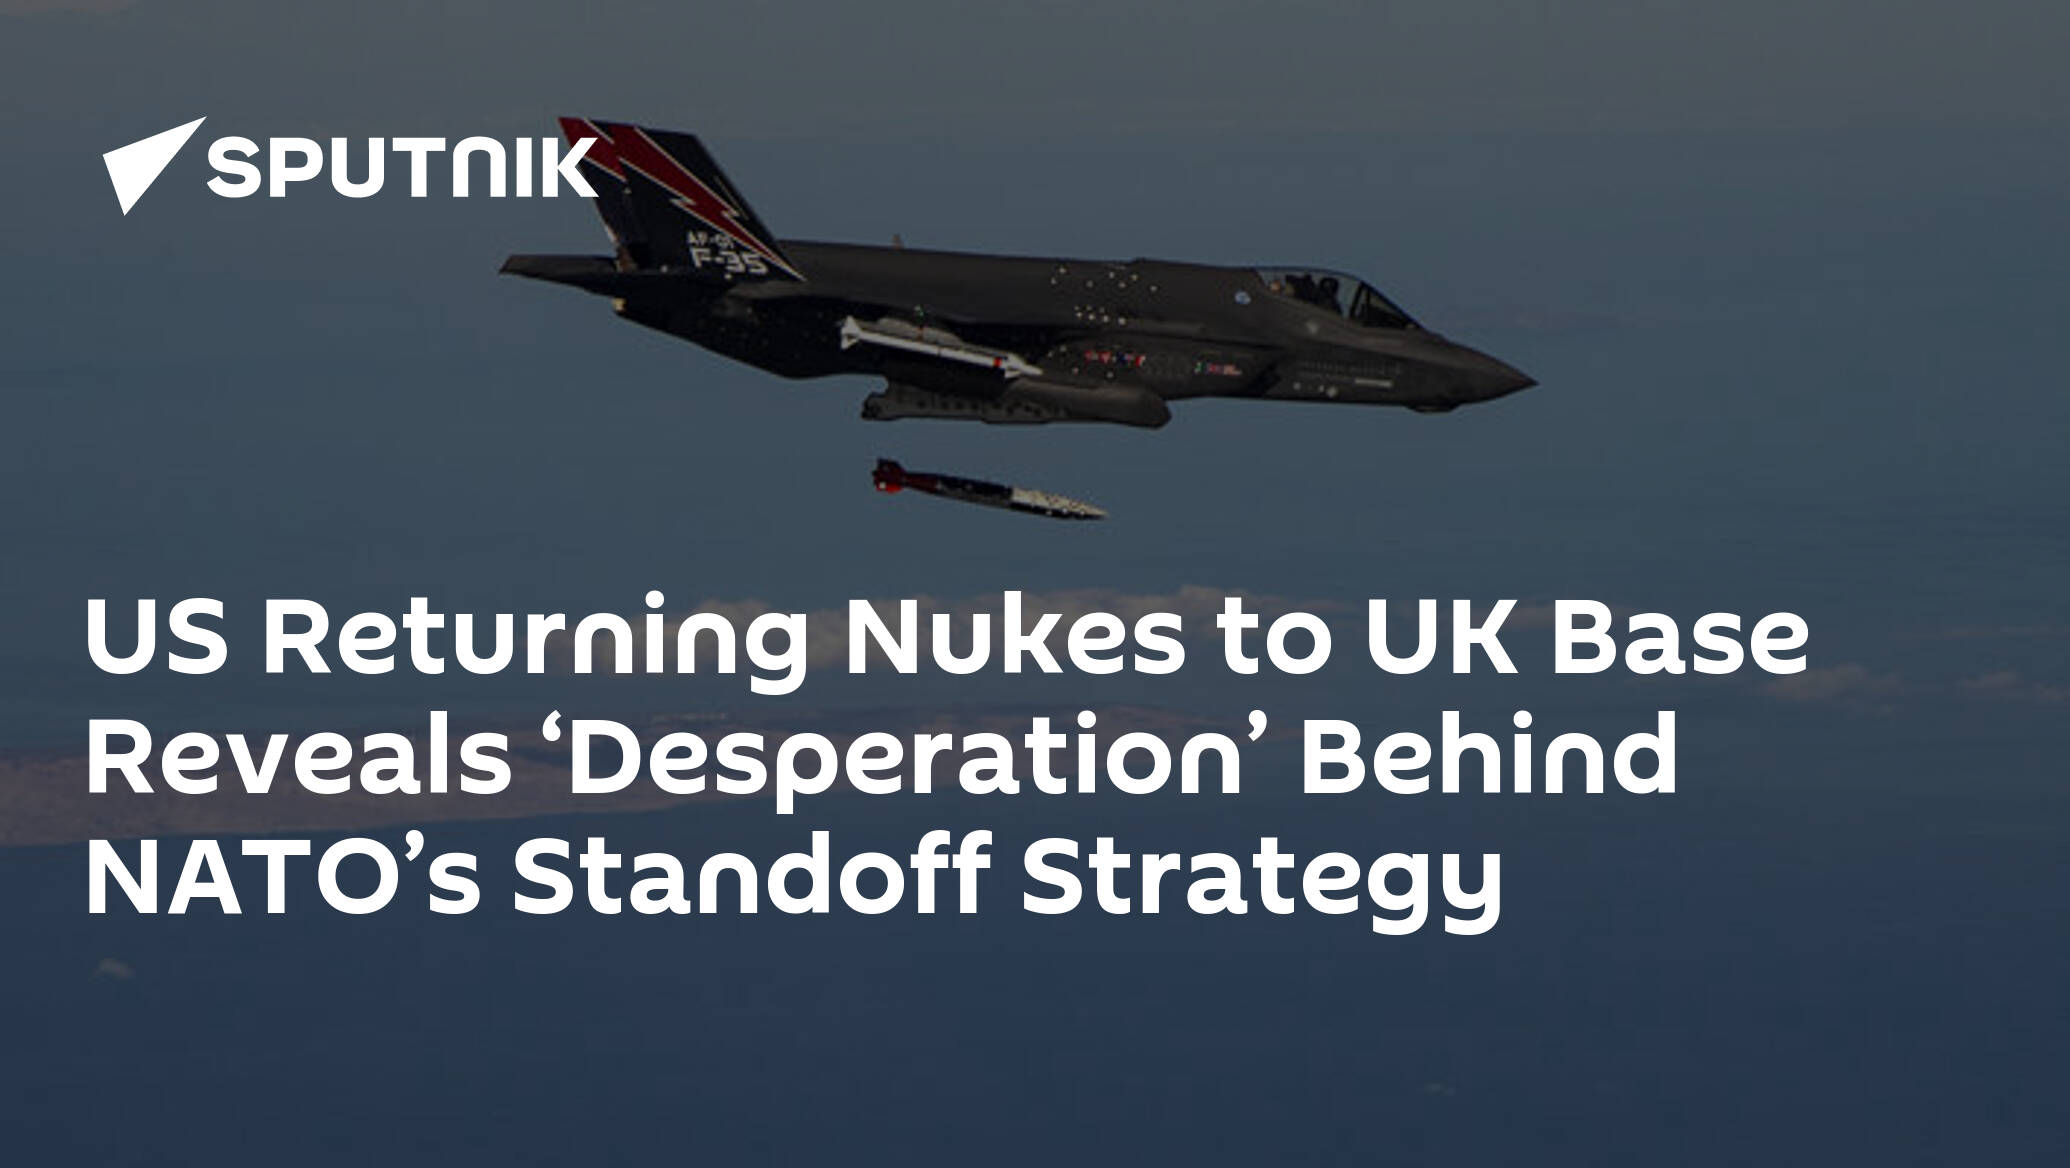 US Returning Nukes, F-35s to UK Base Reveals ‘Desperation’ Behind NATO’s Outdated Standoff Strategy